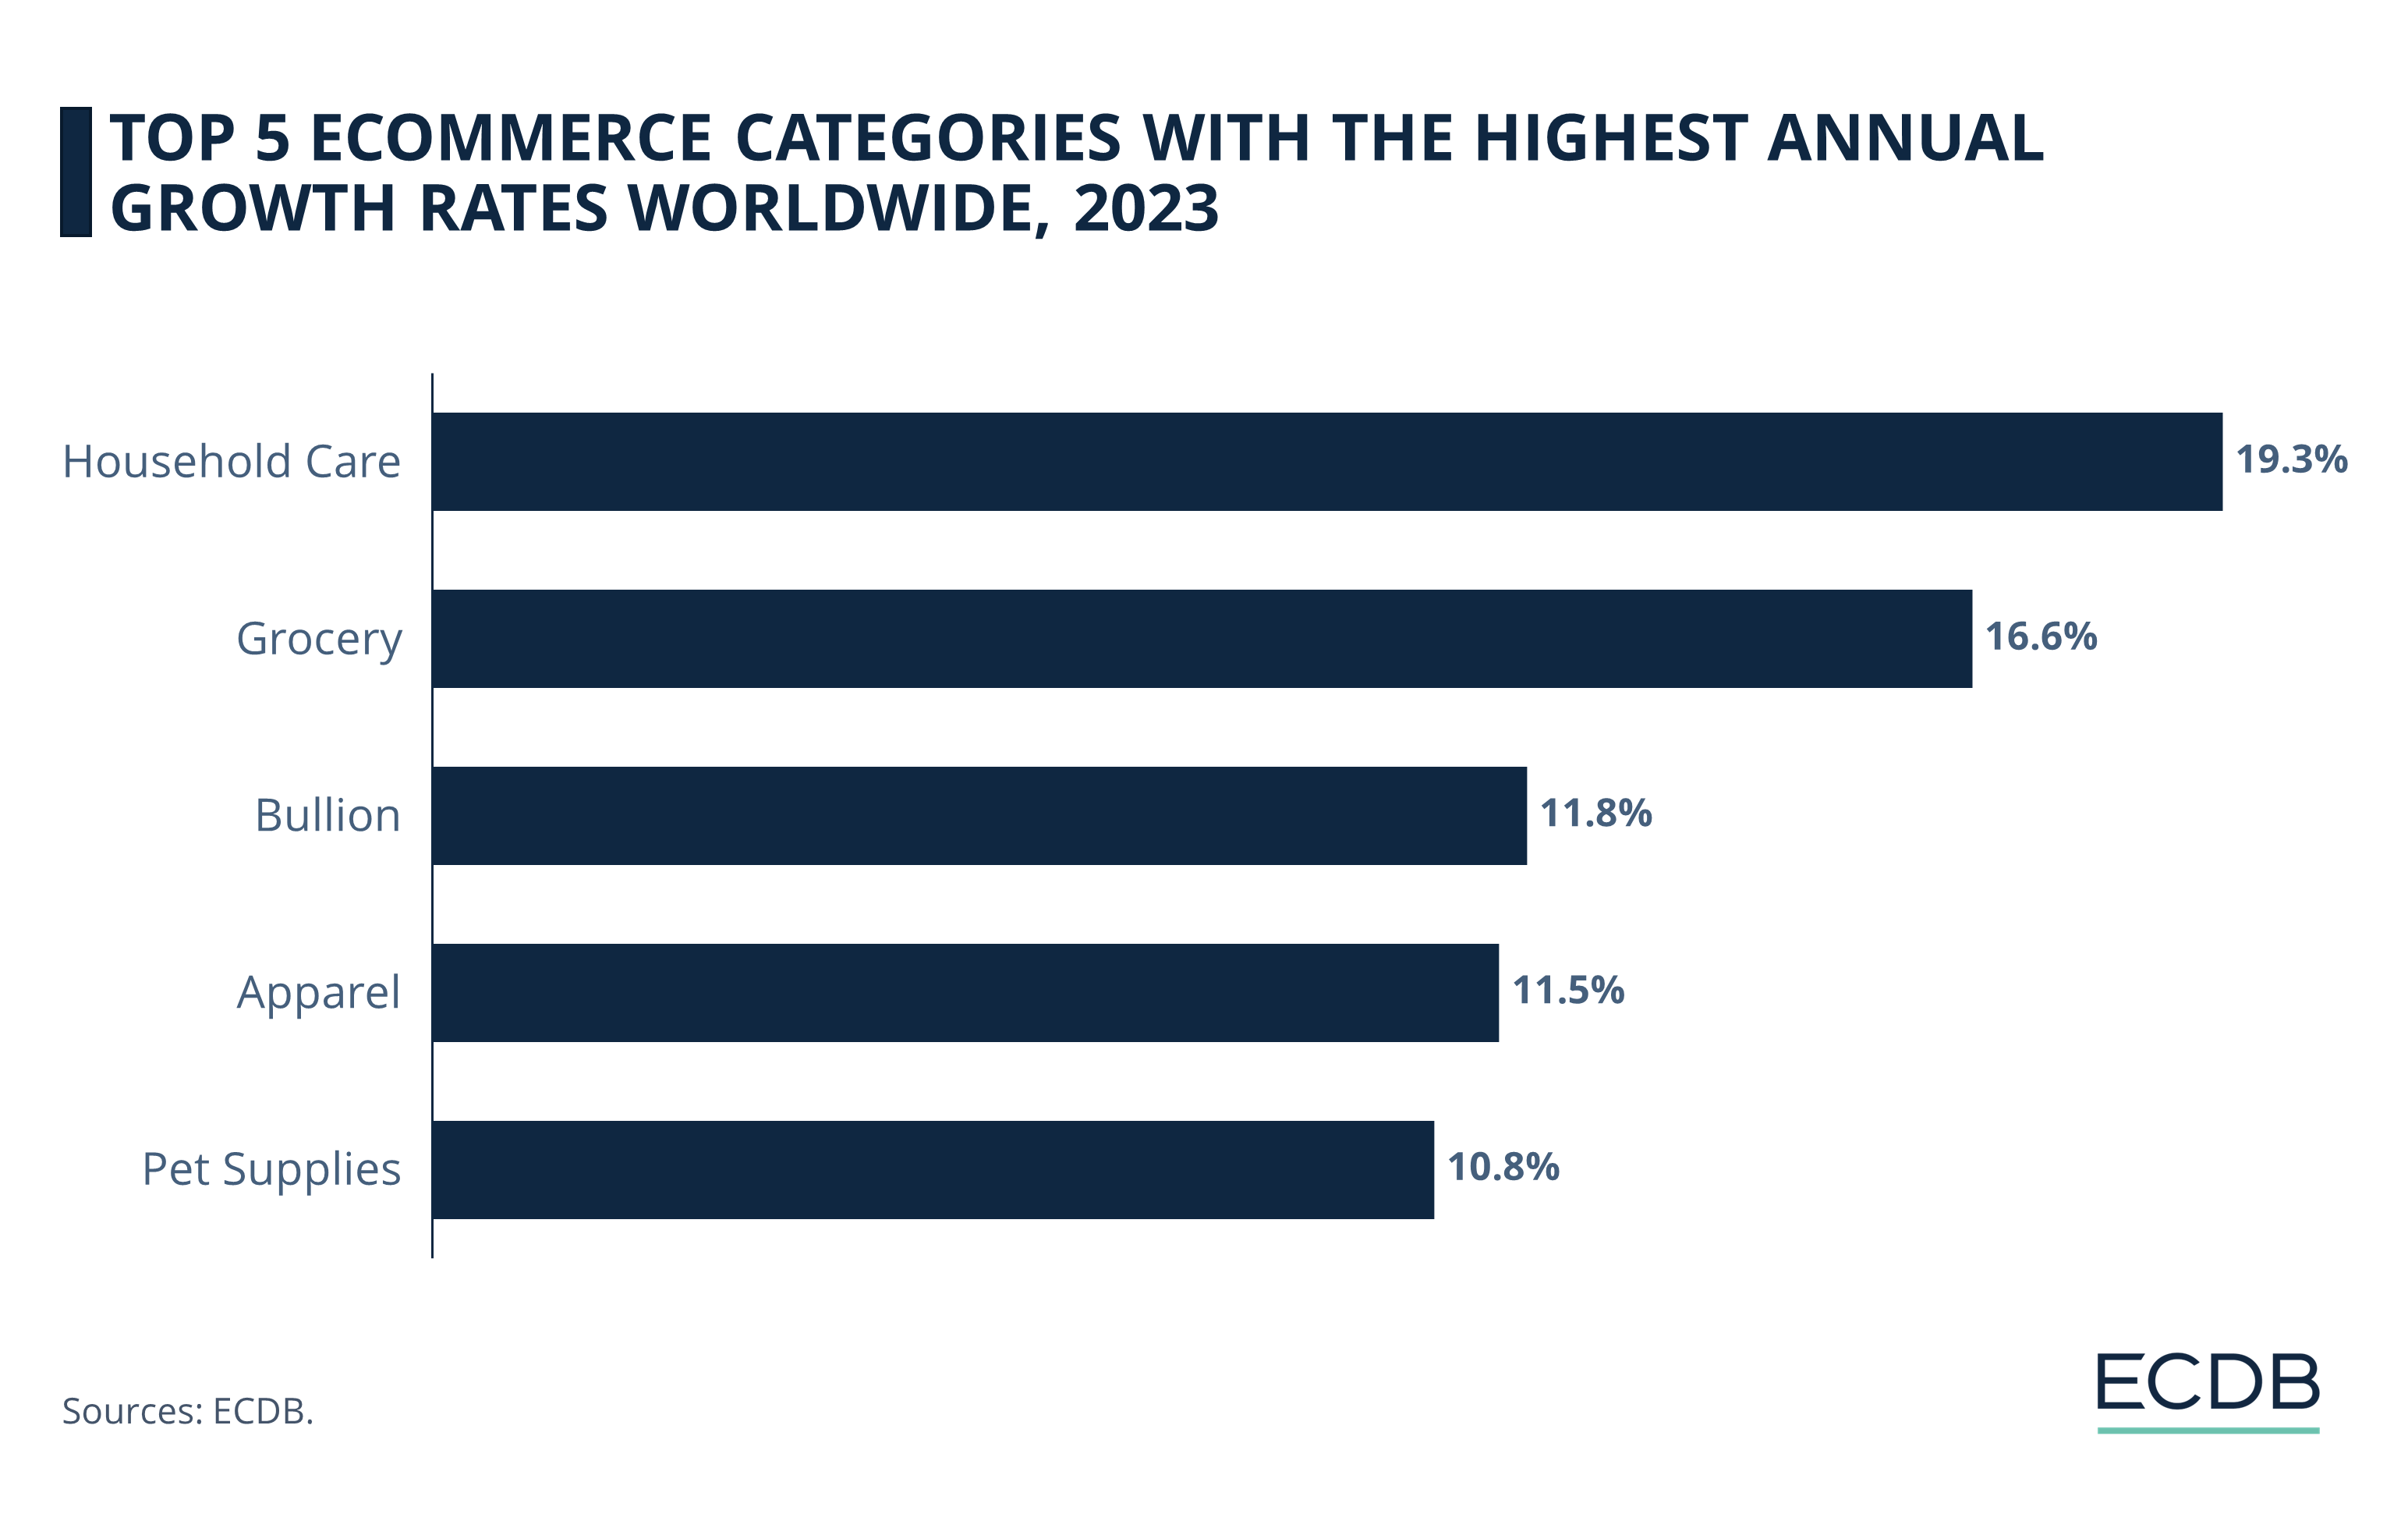 Top 5 eCommerce Categories With the Highest Annual Growth Rates Worldwide, 2023